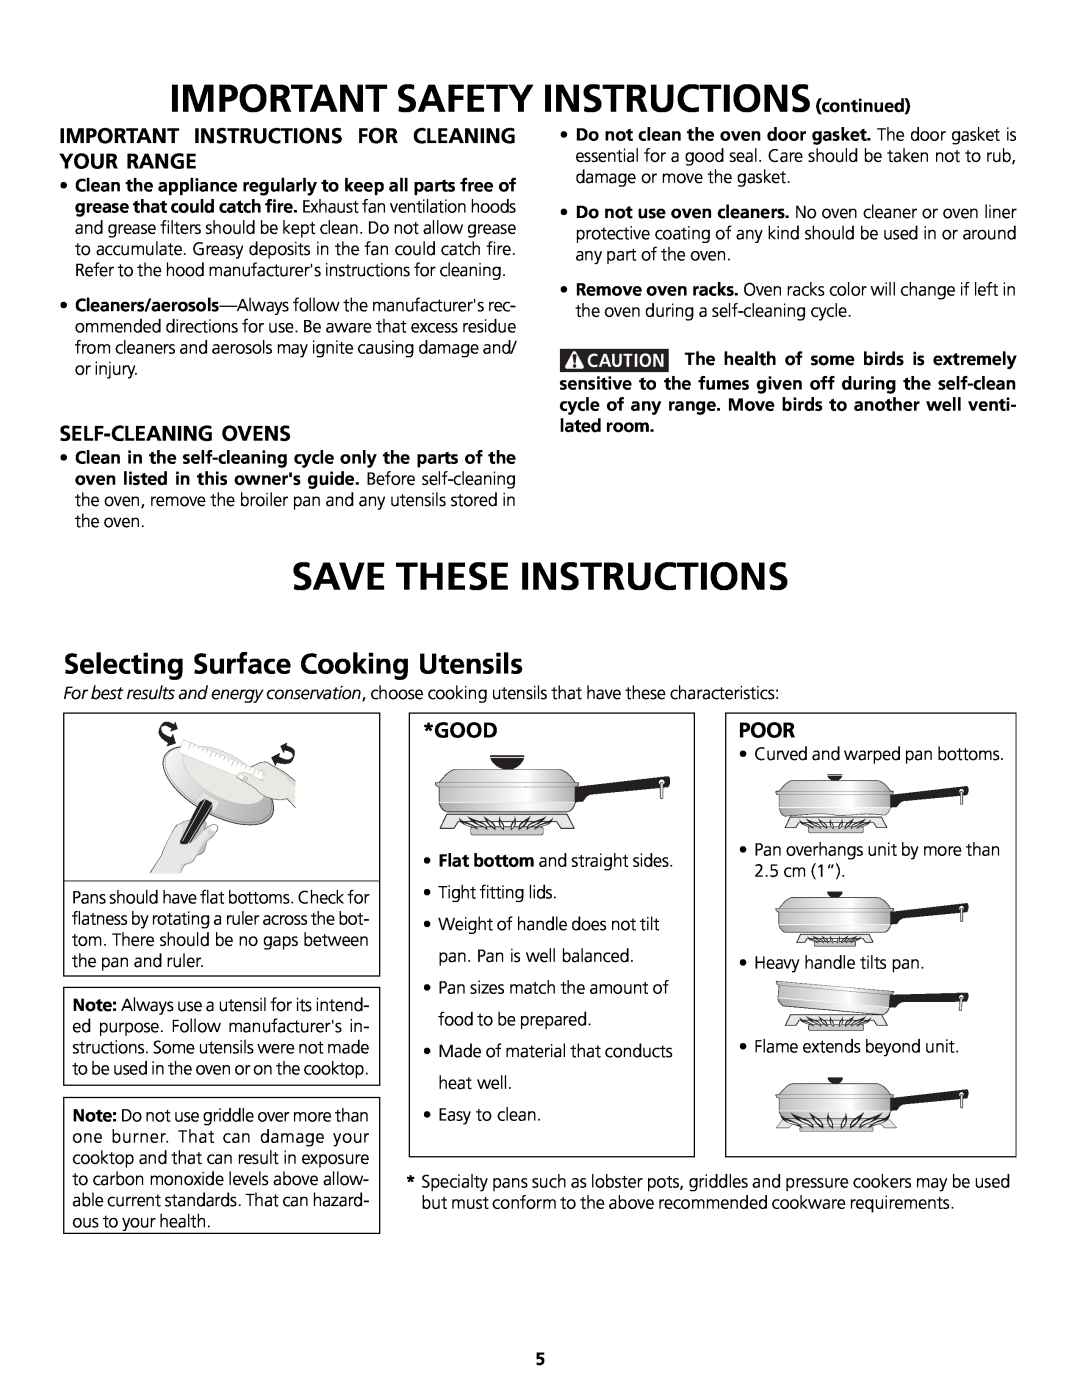 Frigidaire 318200858 Save These Instructions, Selecting Surface Cooking Utensils, Your Range, Self-Cleaning Ovens, Good 